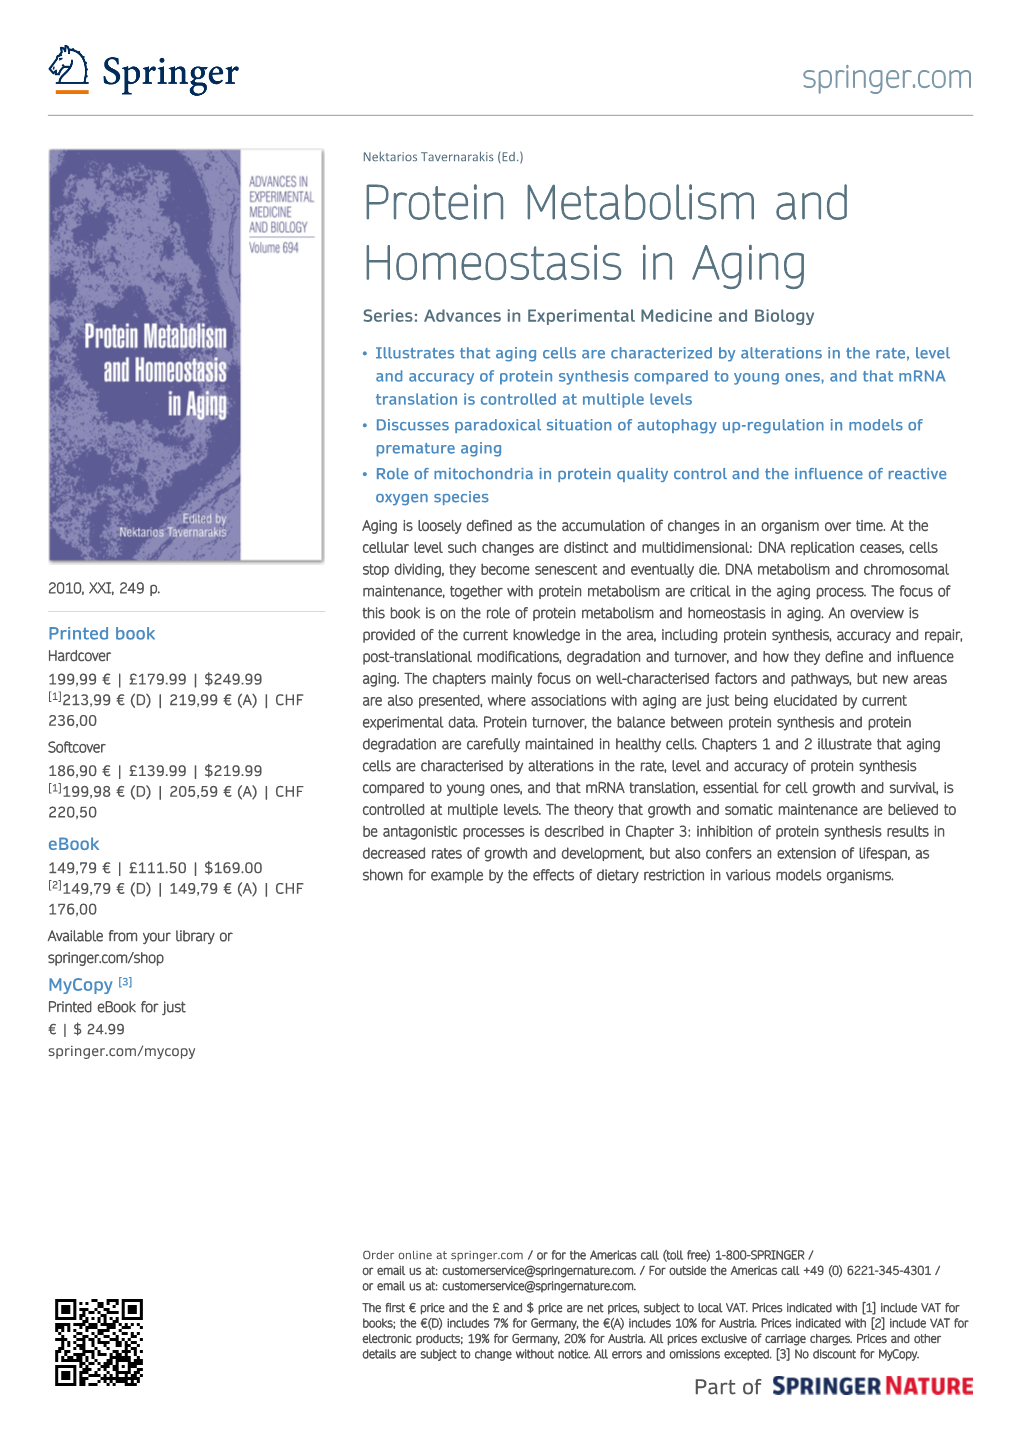 Protein Metabolism and Homeostasis in Aging Series: Advances in Experimental Medicine and Biology